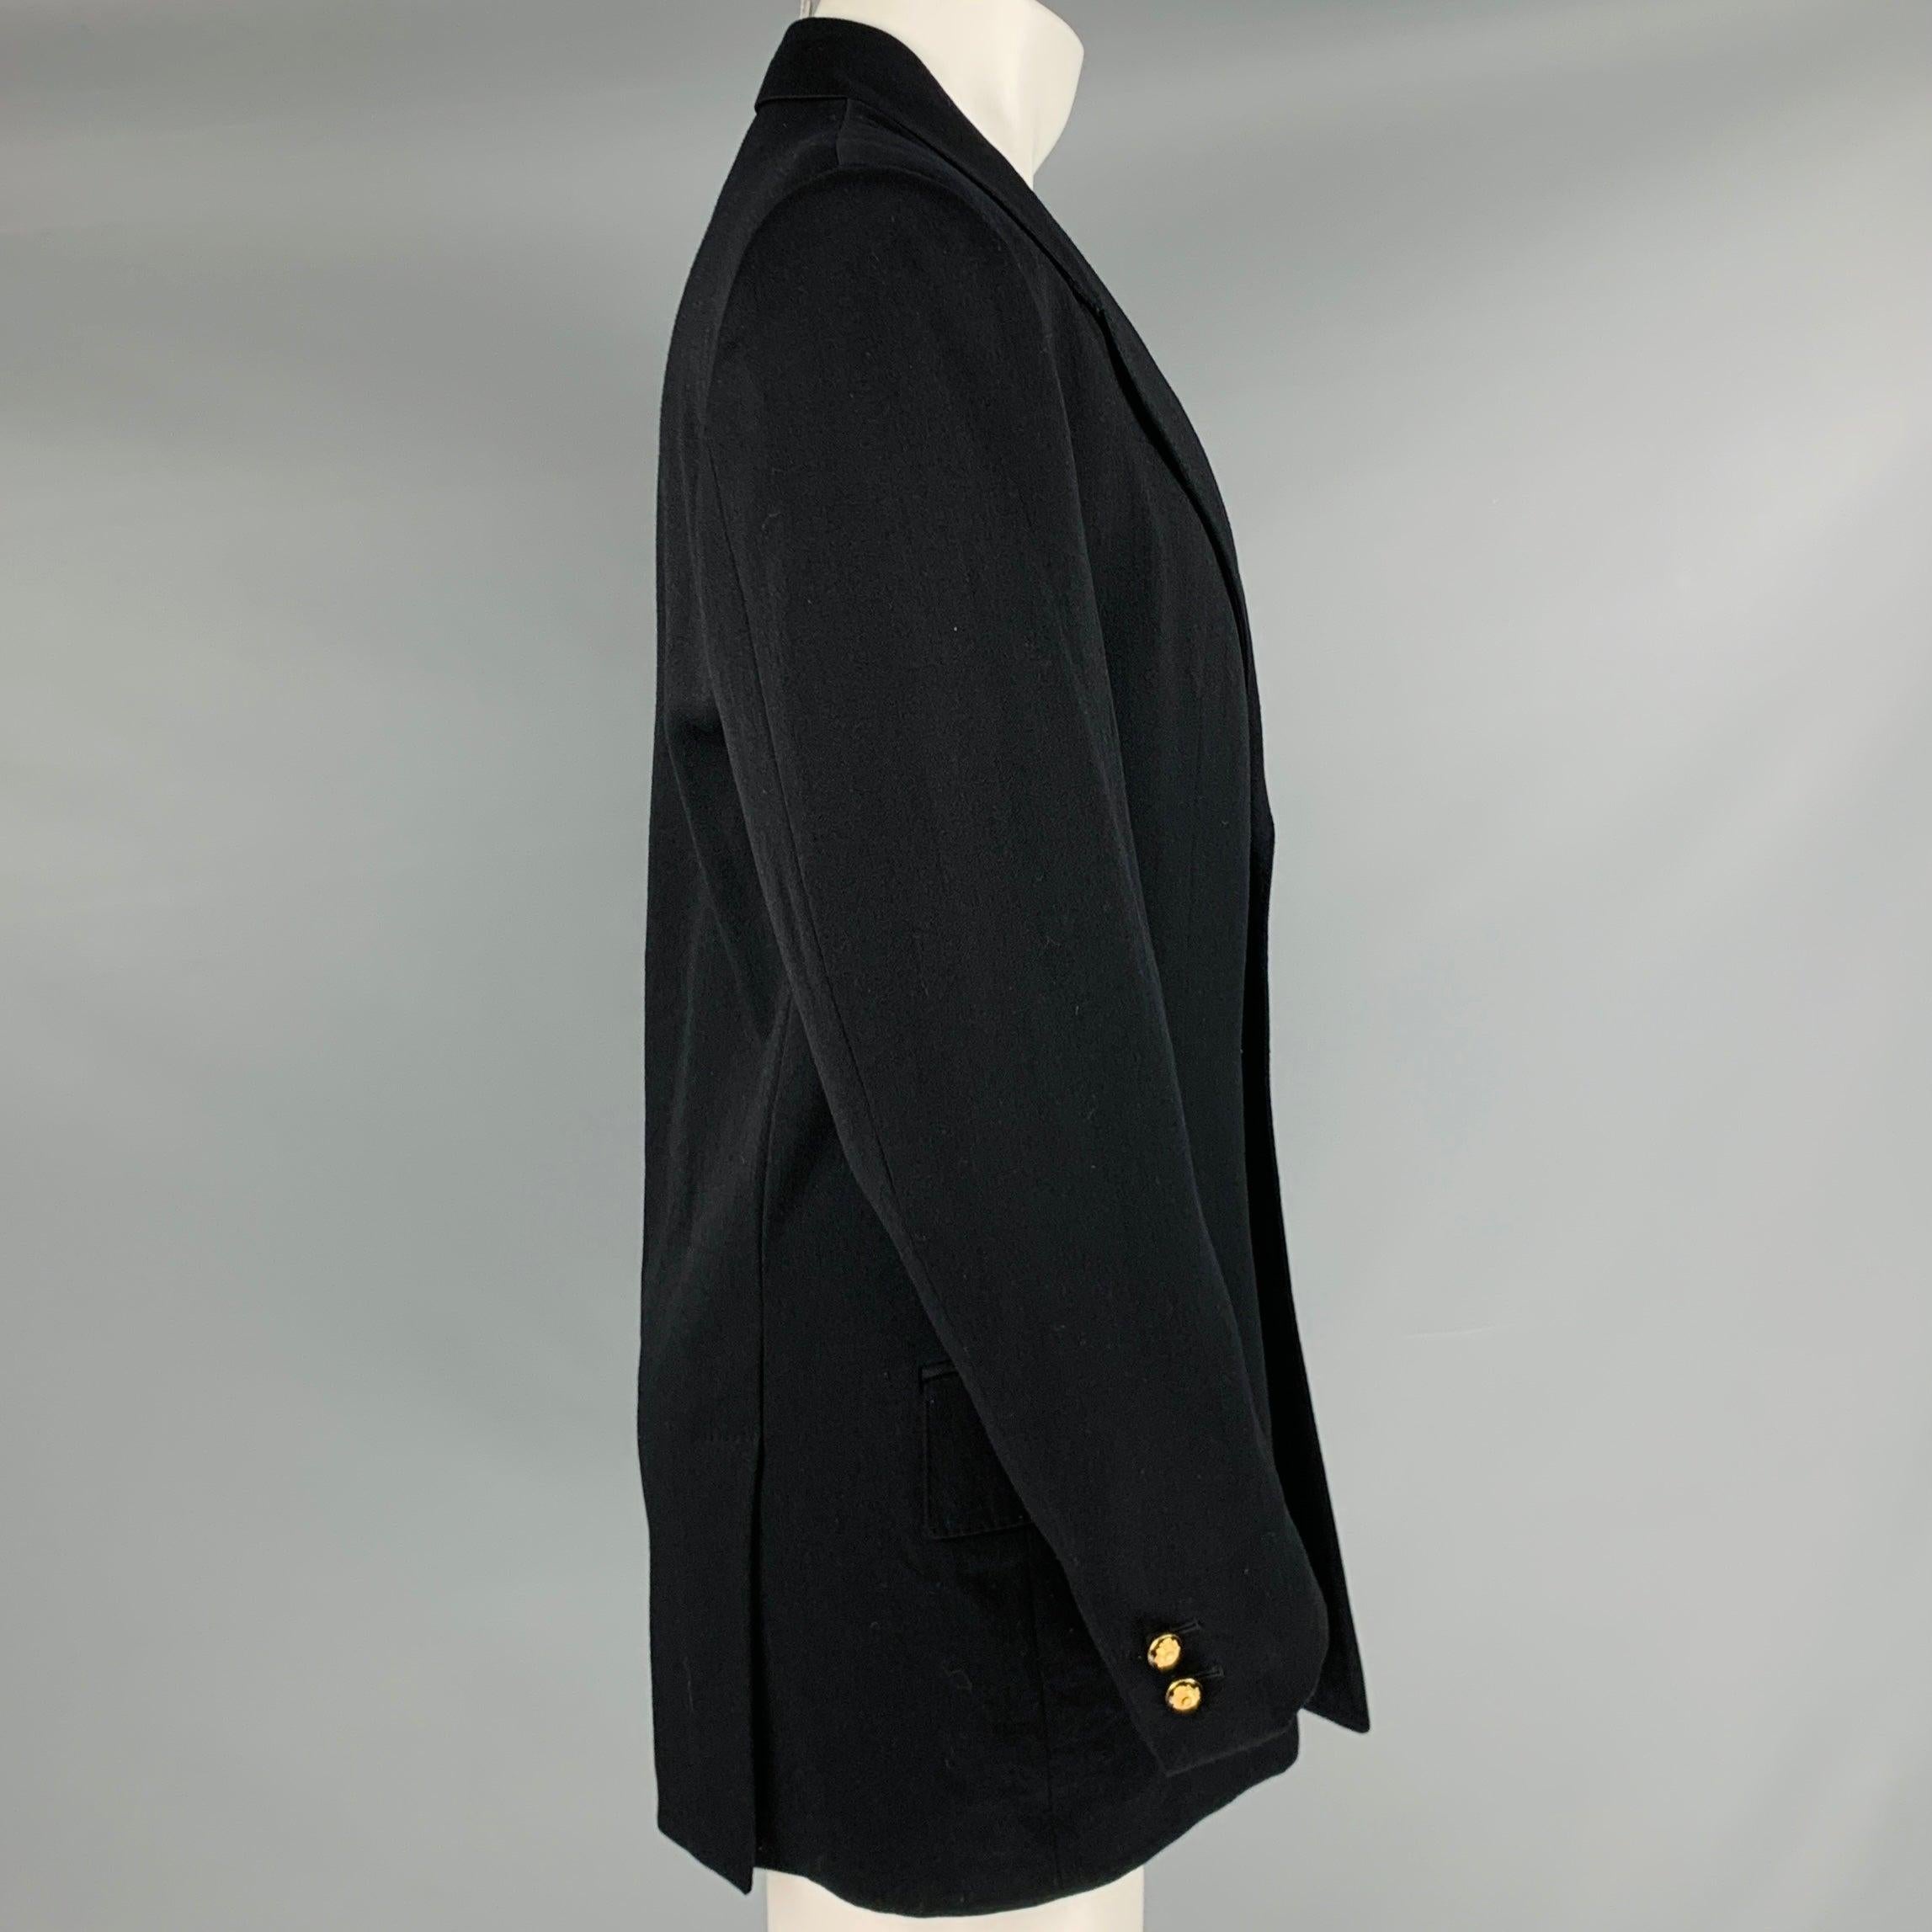 GIANNI VERSACE jacket
in a black wool fabric featuring a single breasted style, double vented back, and three button closure.Excellent Pre-Owned Condition. 

Marked:   IT 50 

Measurements: 
 
Shoulder: 19 inches Chest: 40 inches Sleeve: 25 inches